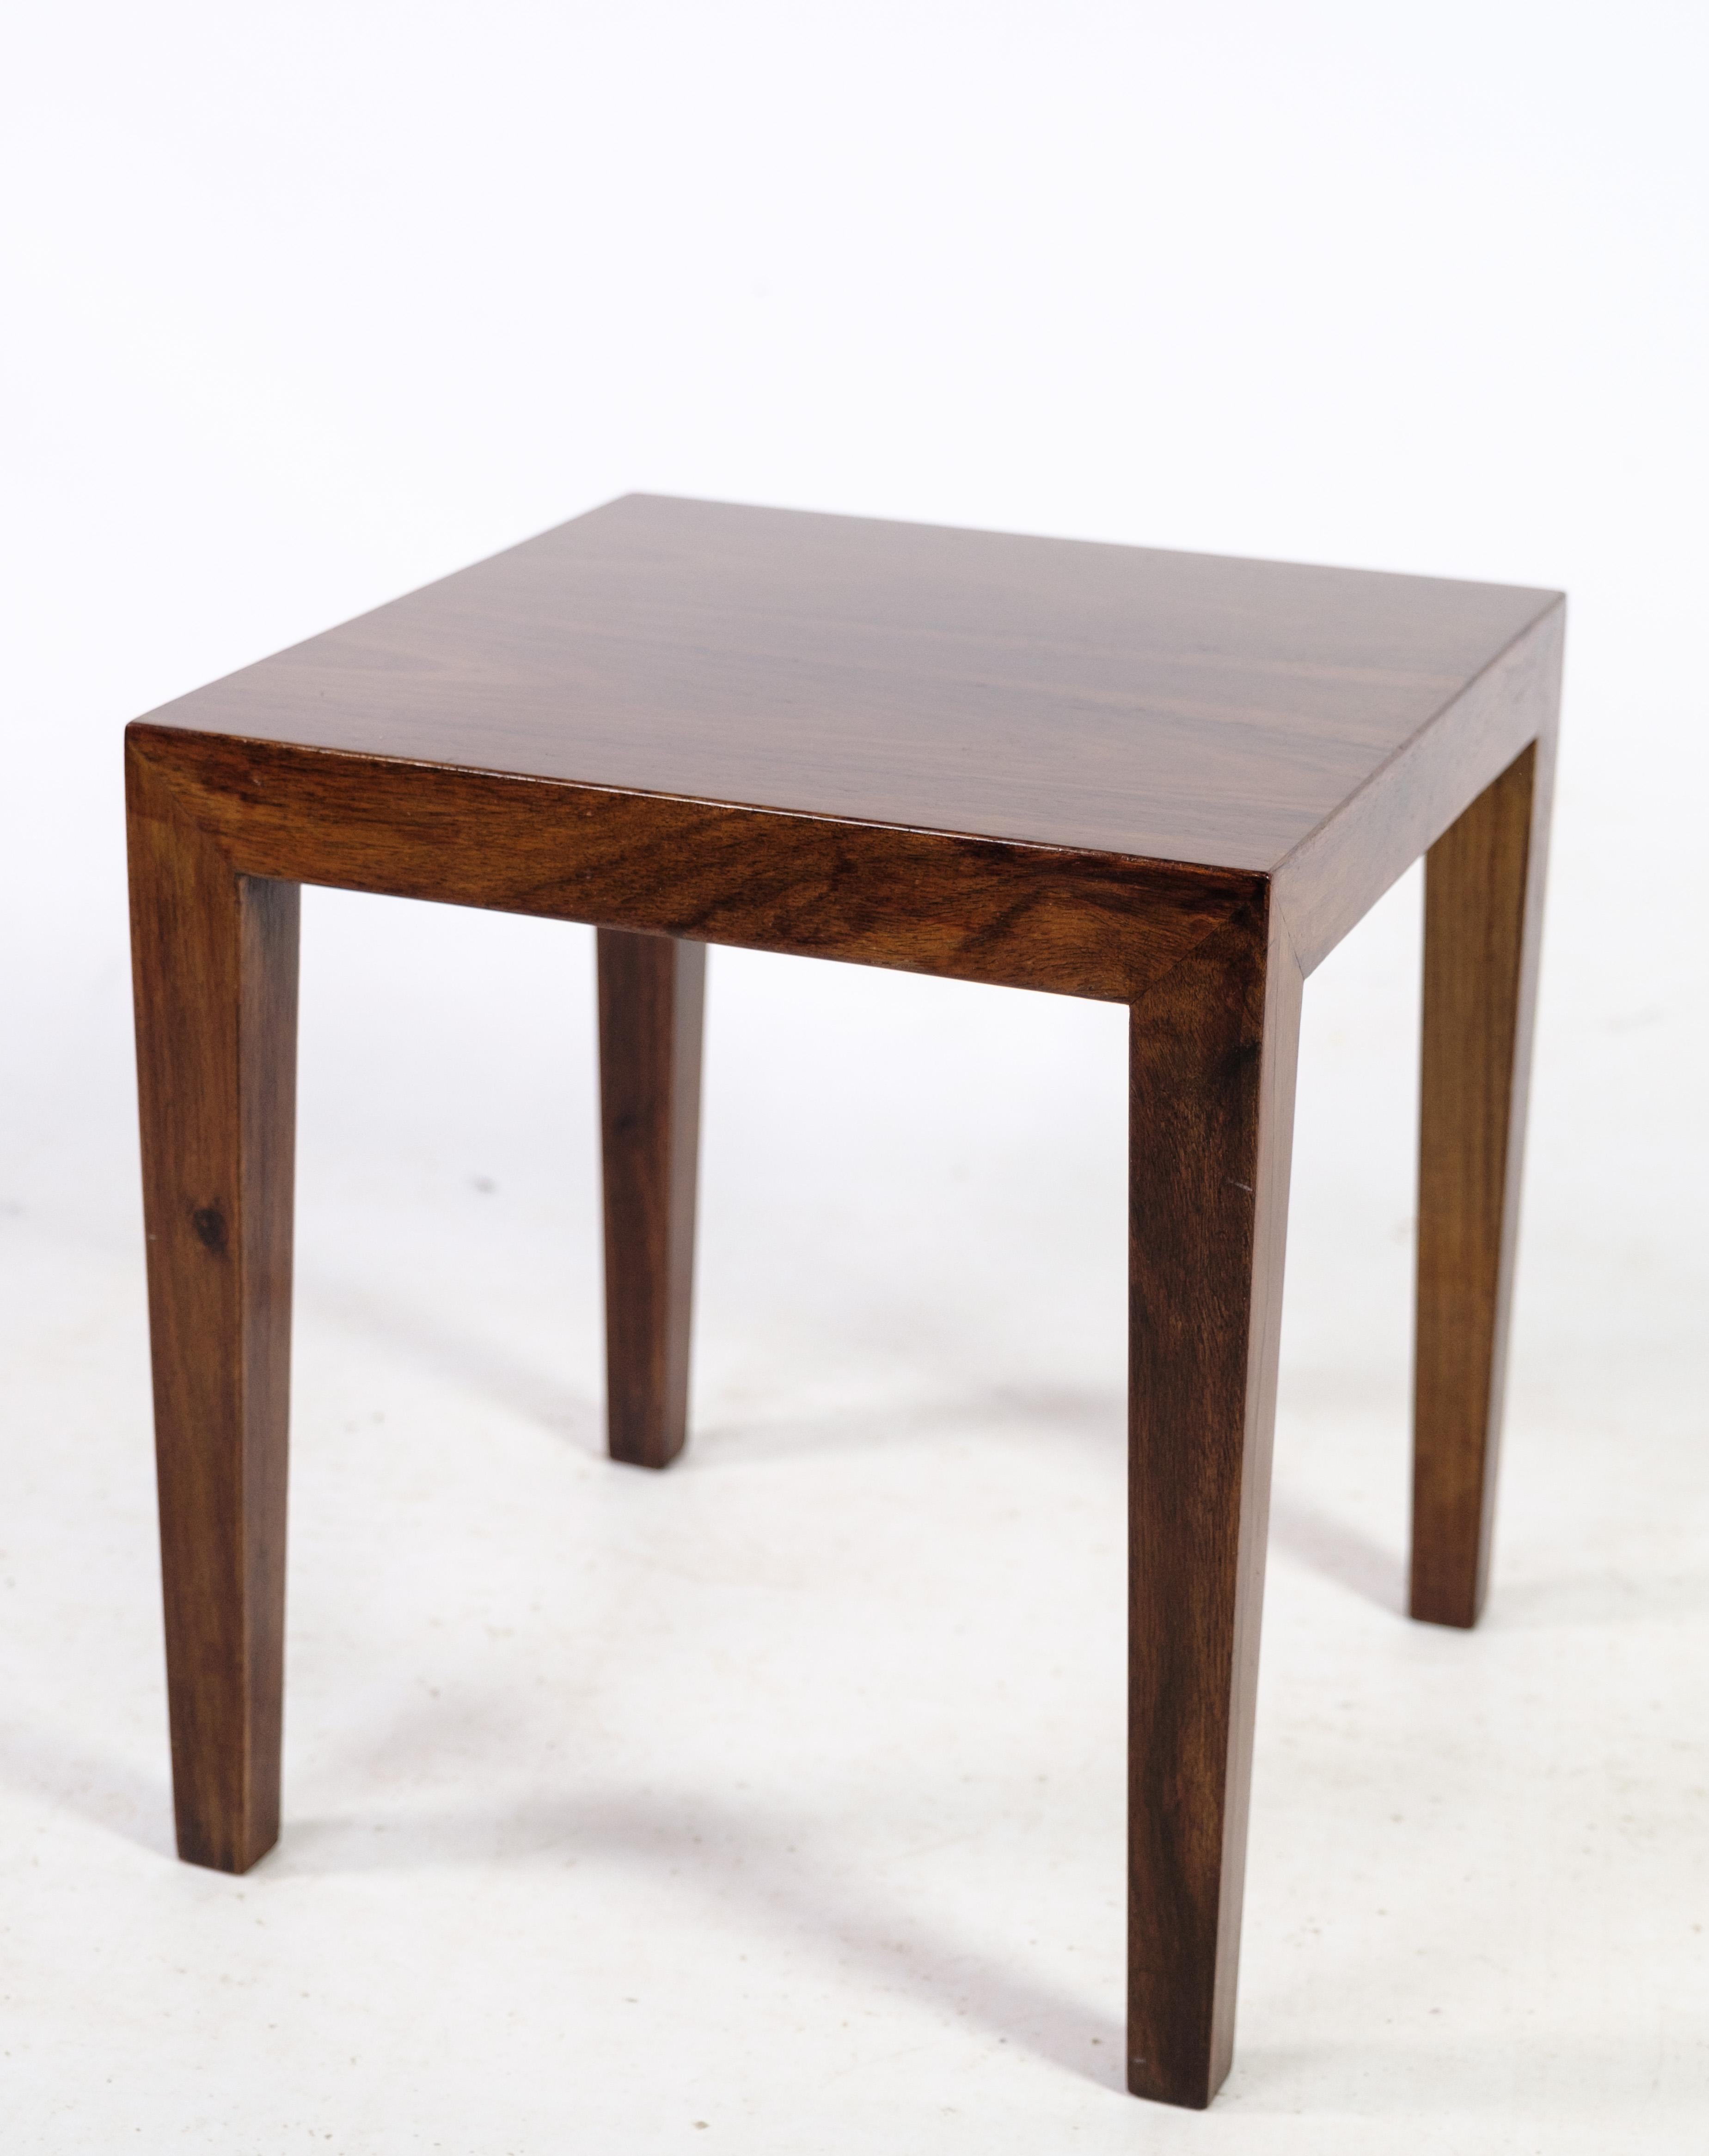 the table is made for rosewood